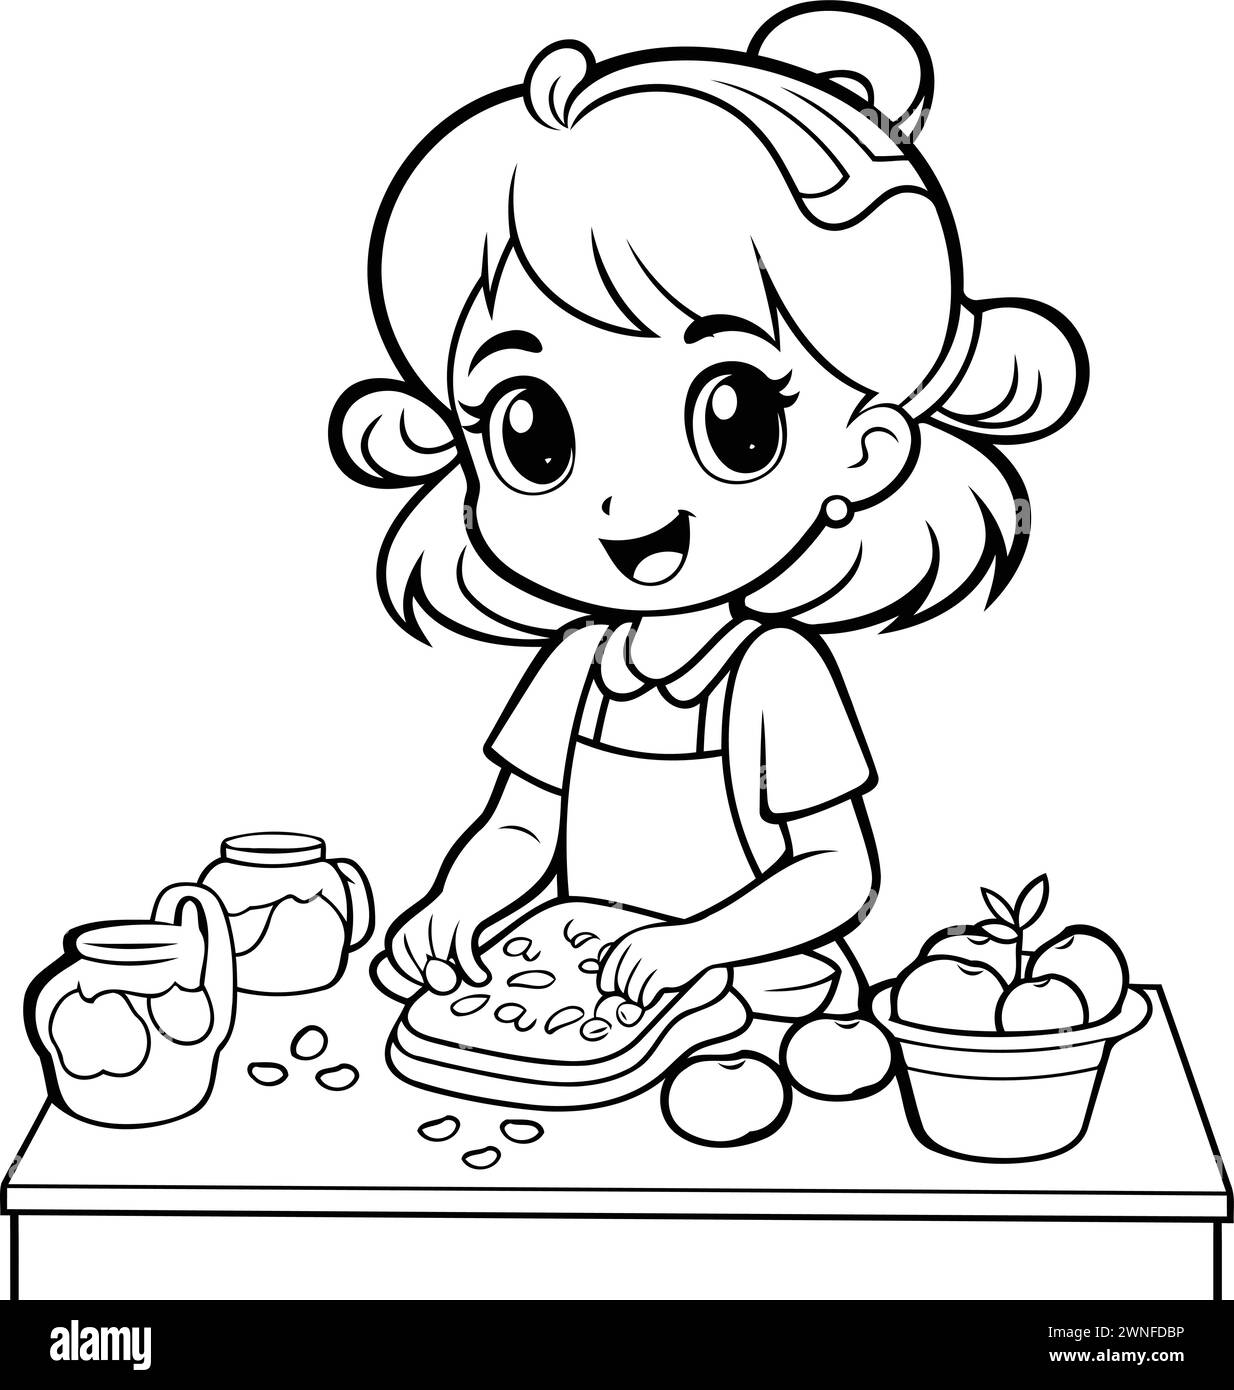 Black and White Cartoon Illustration of Cute Little Girl Preparing Food for Coloring Book Stock Vector